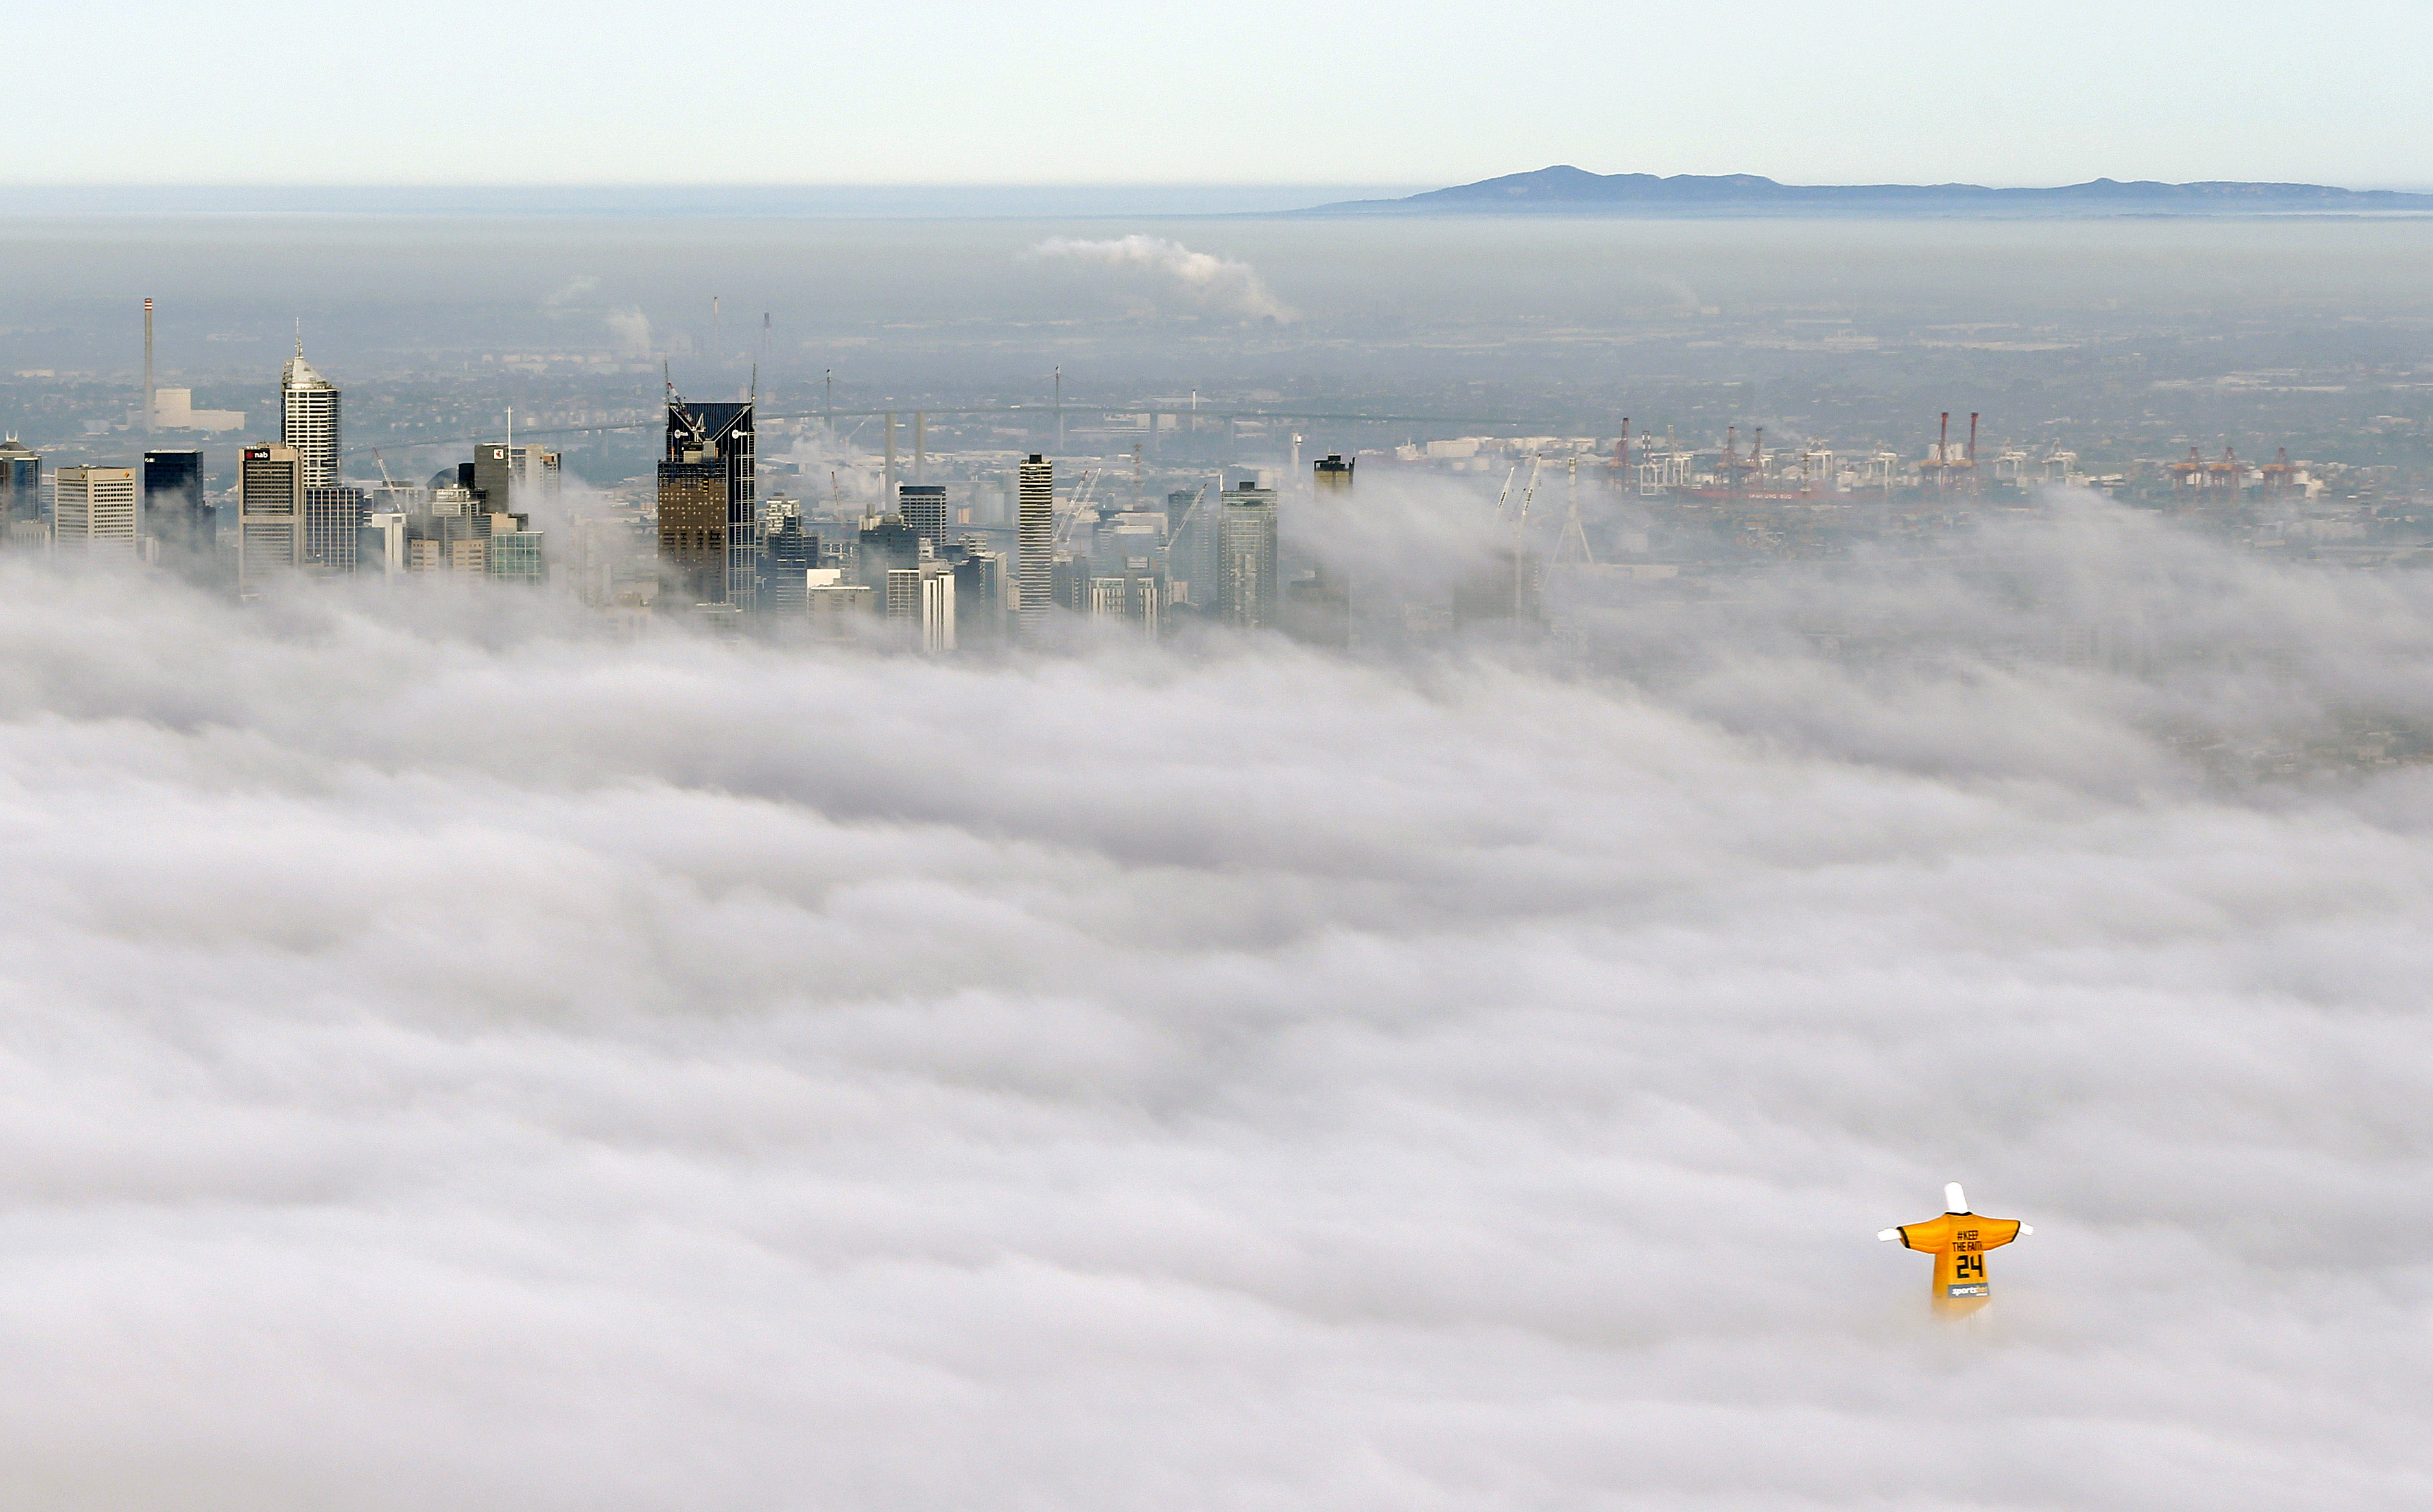 A hot air balloon in the likeness of Brazil's Christ The Redeemer statue, wearing the colors of Australia's soccer team floats through clouds over the Melbourne skyline on June 10, 2014.